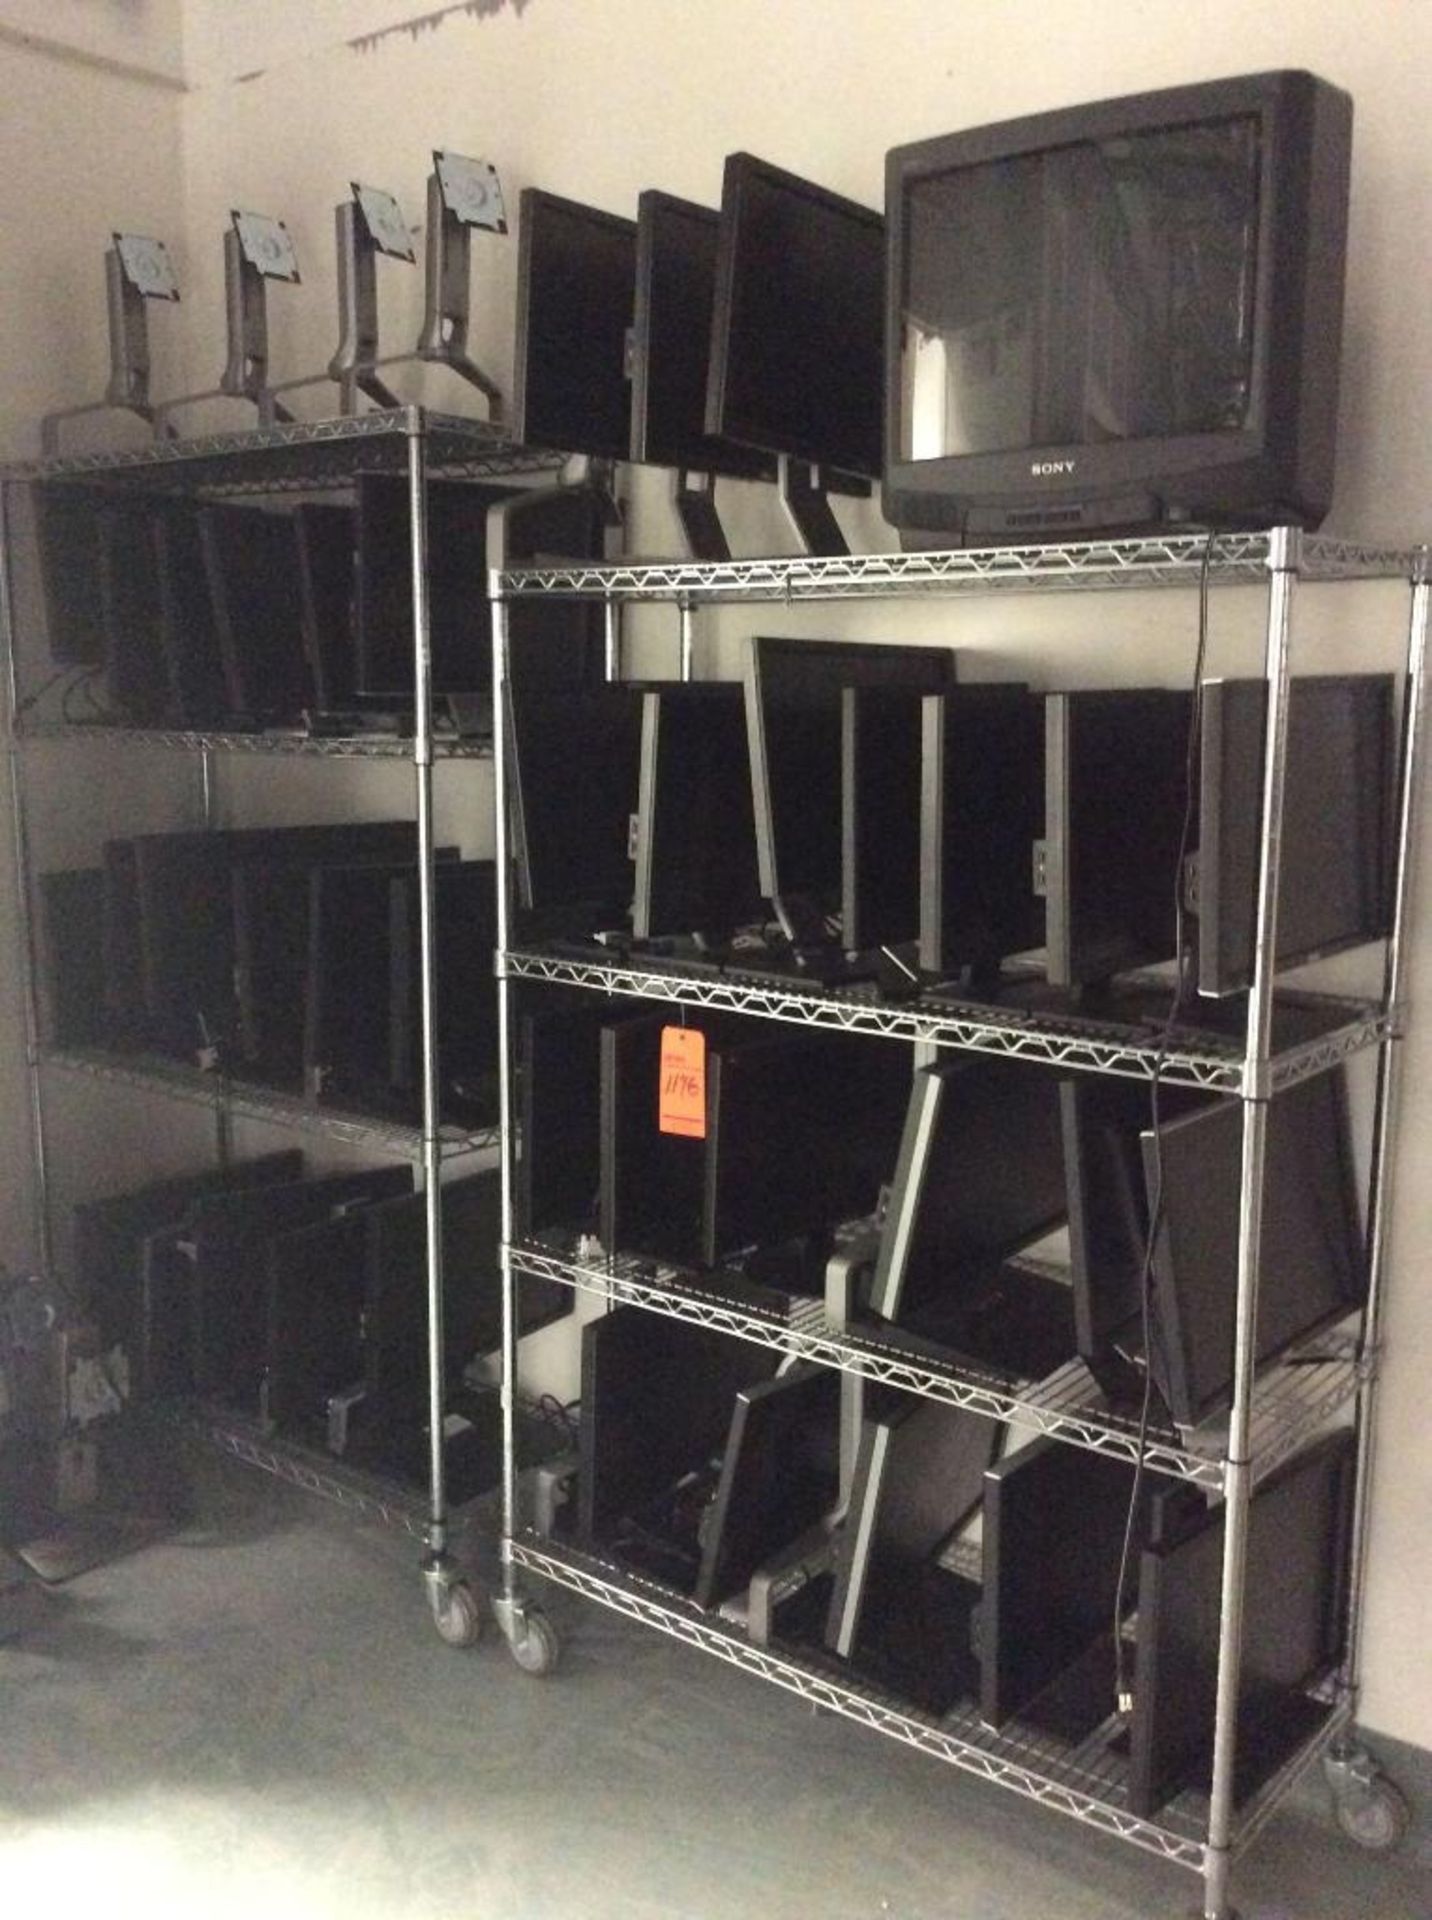 Large lot of assorted IT equipment contained on 7 rolling racks - includes monitors, printers, wires - Image 2 of 4